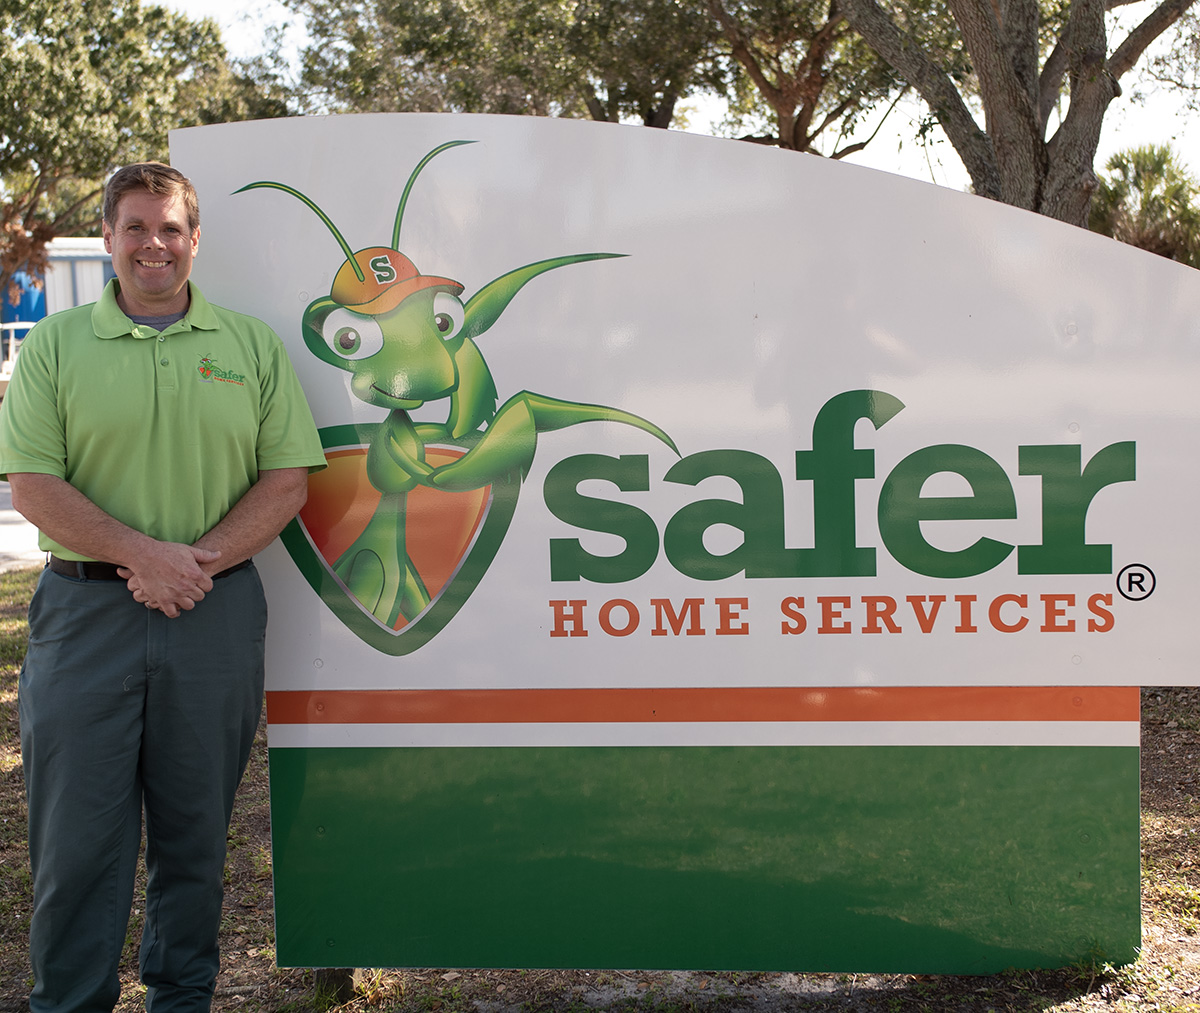 Man next to Safer Home Services sign